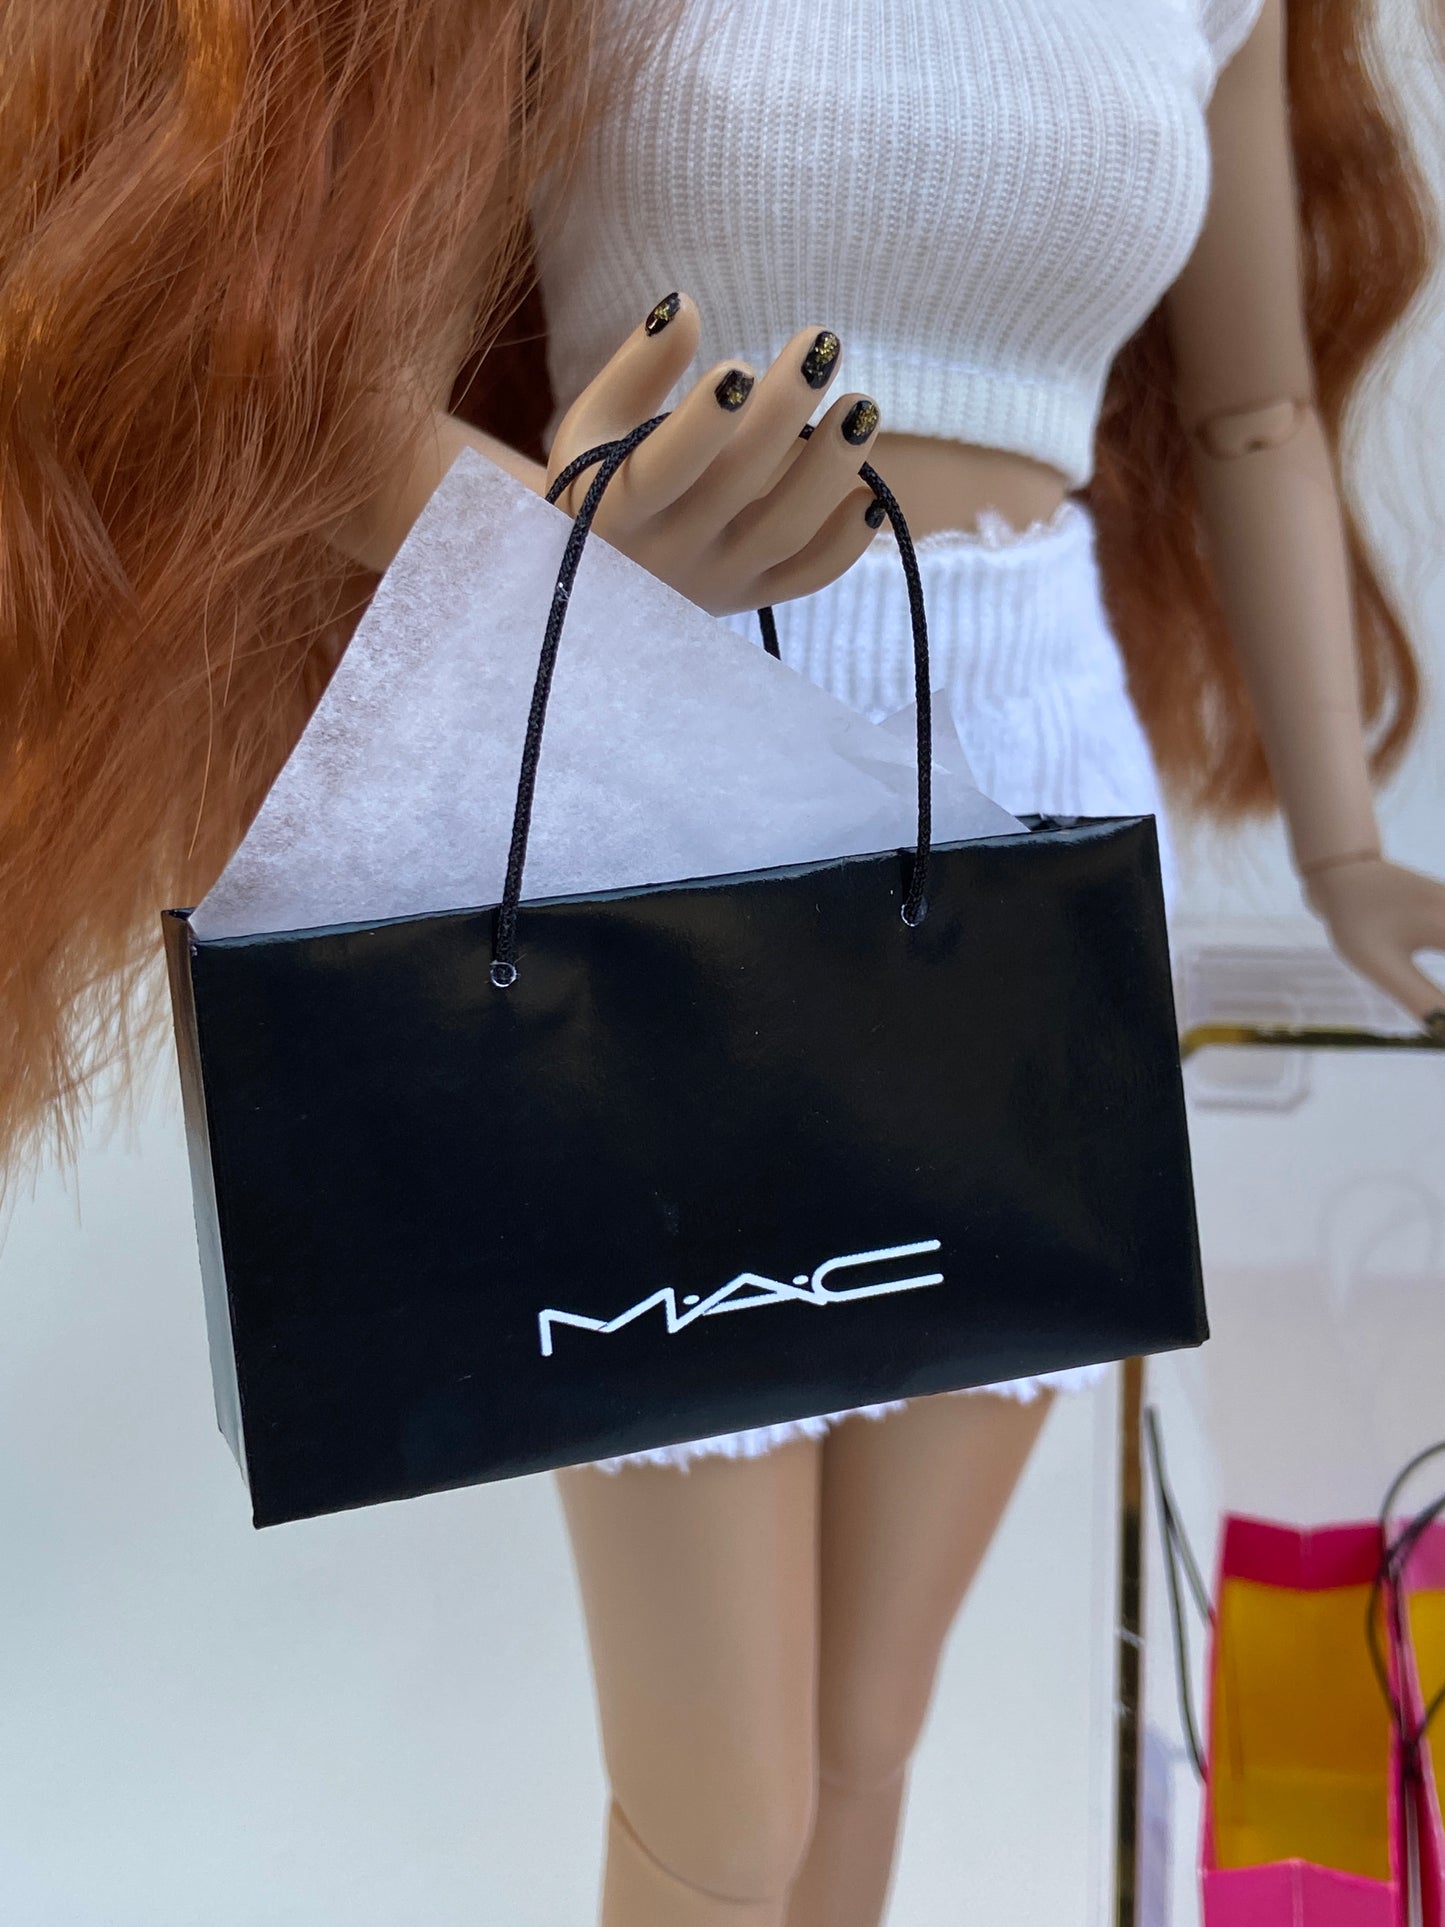 MINIATURE MAKEUP SHOPPING BAGS FOR FASHION DOLL